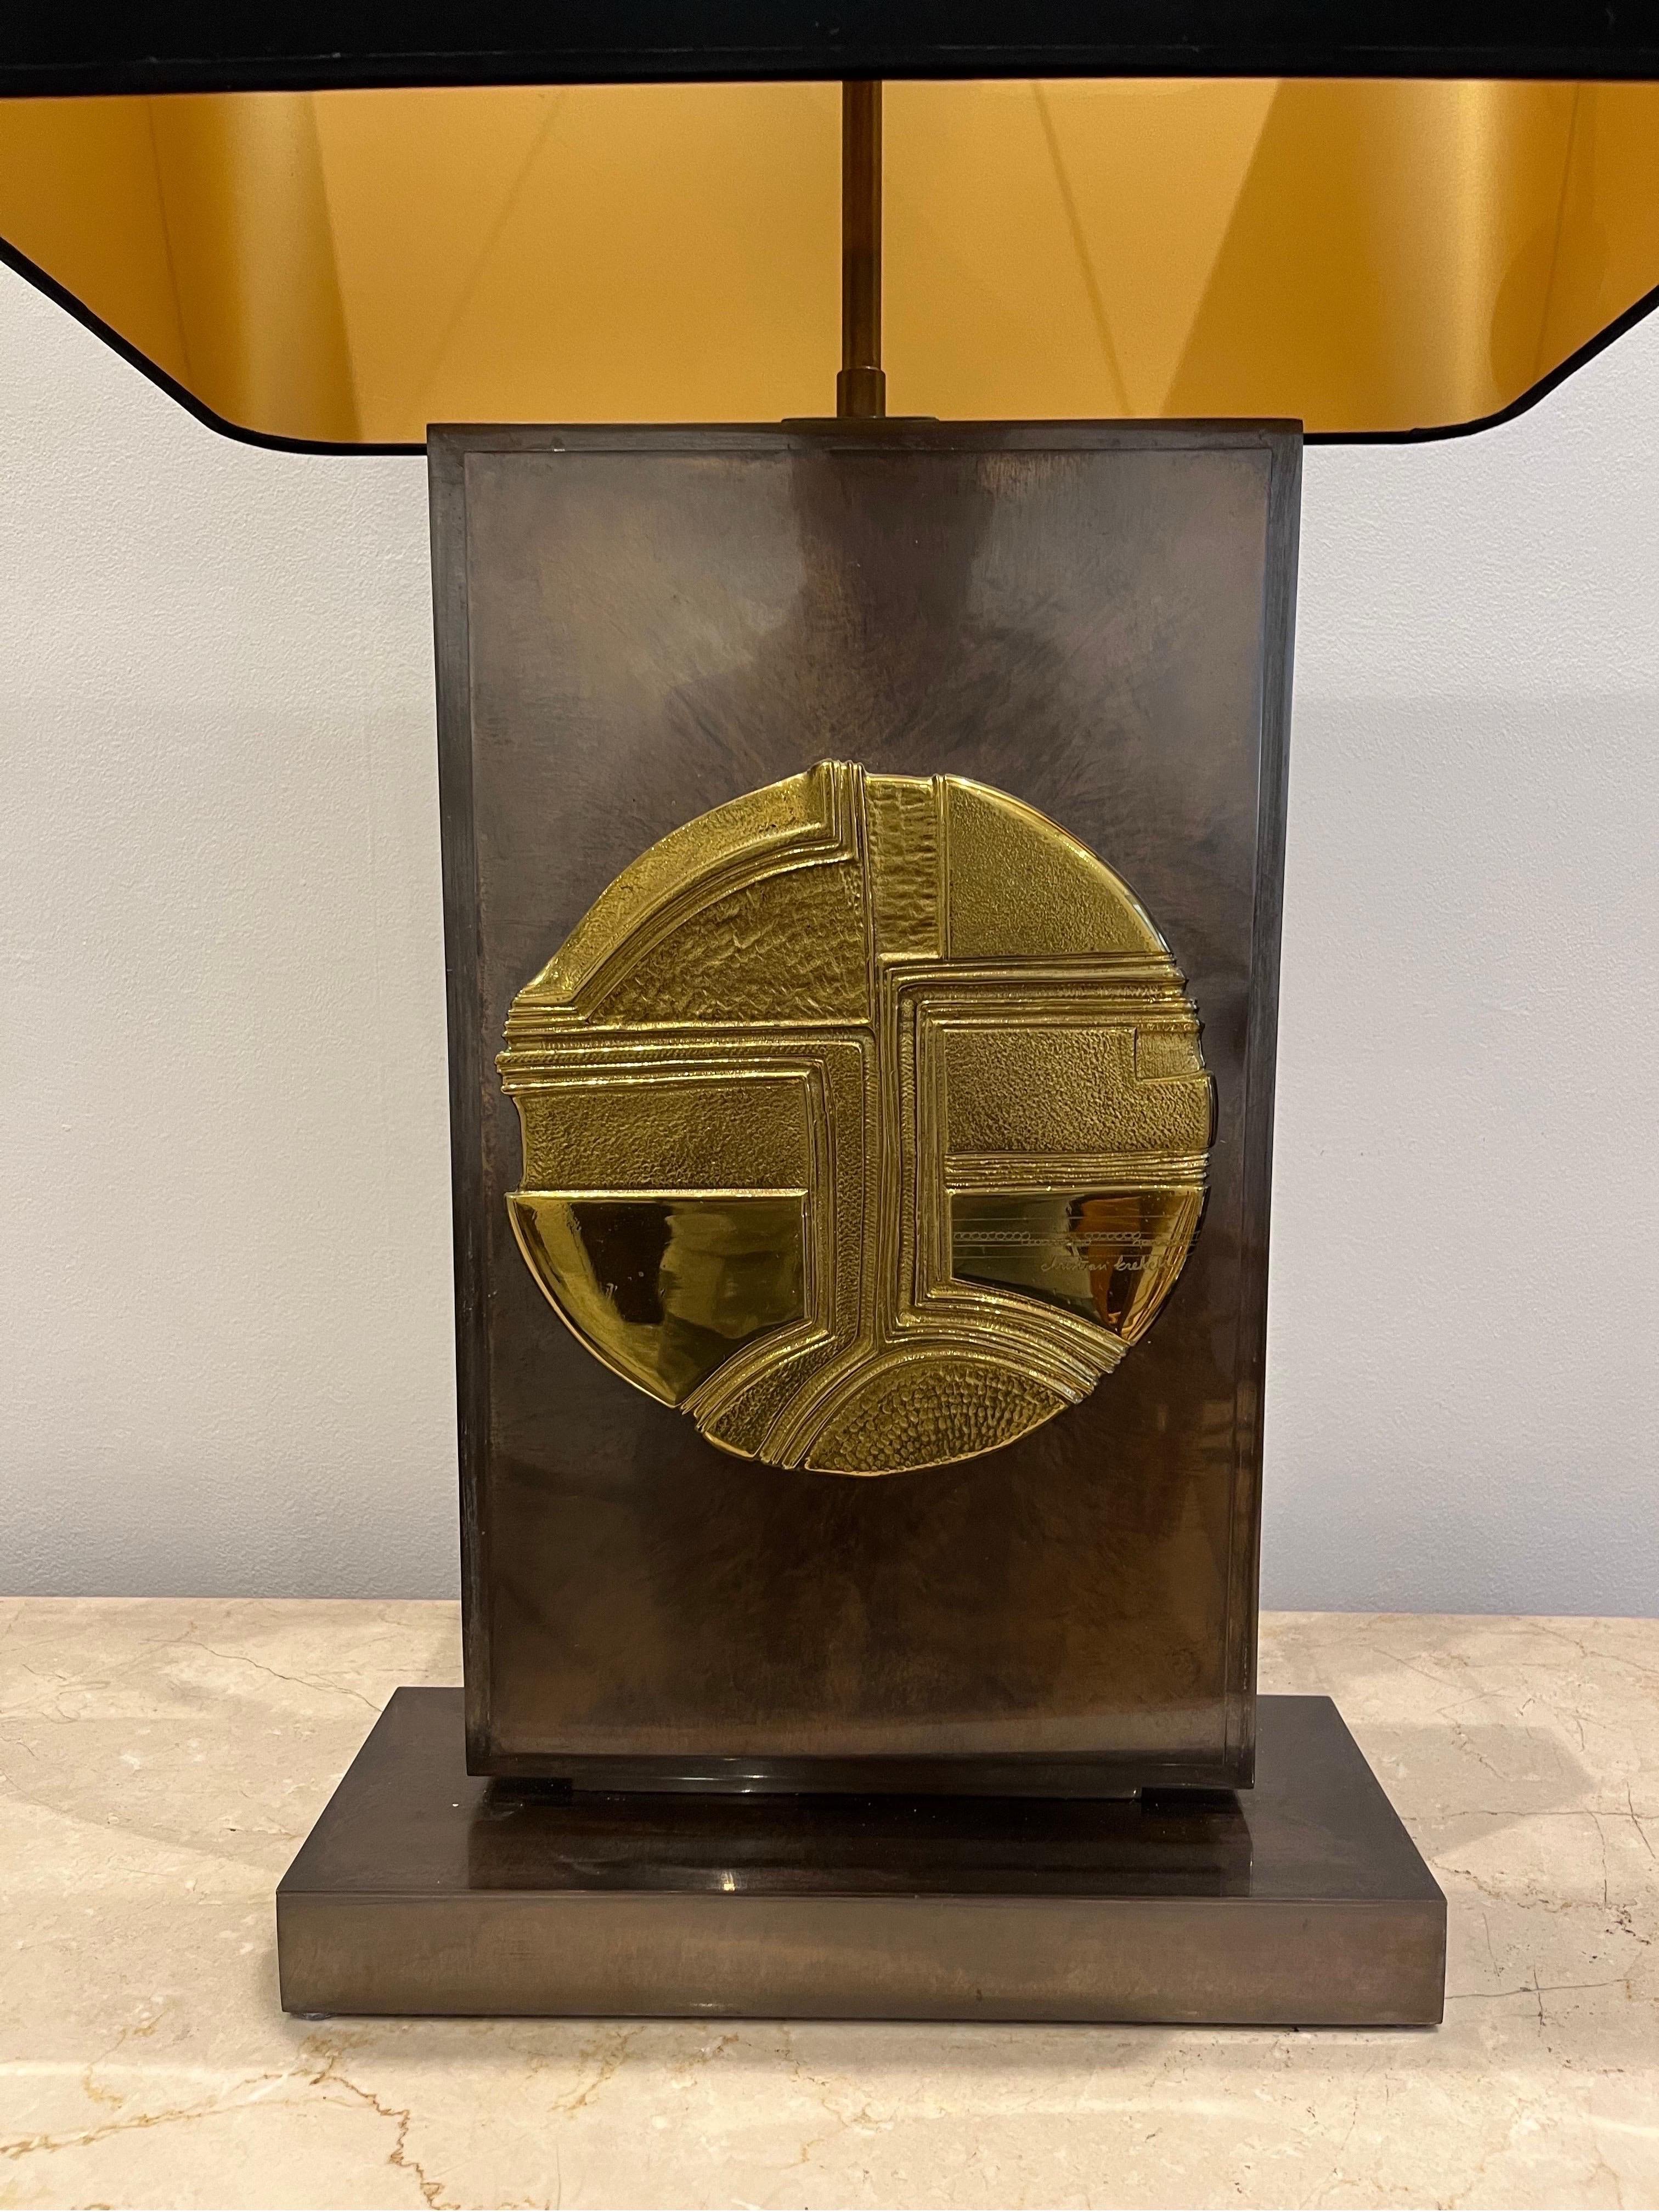 Christian Krekels is a Belgian designer who created decorative furniture from the 1970s. The present lamp is made of patinated metal. The shape is Rectangular. In the centre, there is the bronze gilt circle decorated with an abstract motif giving